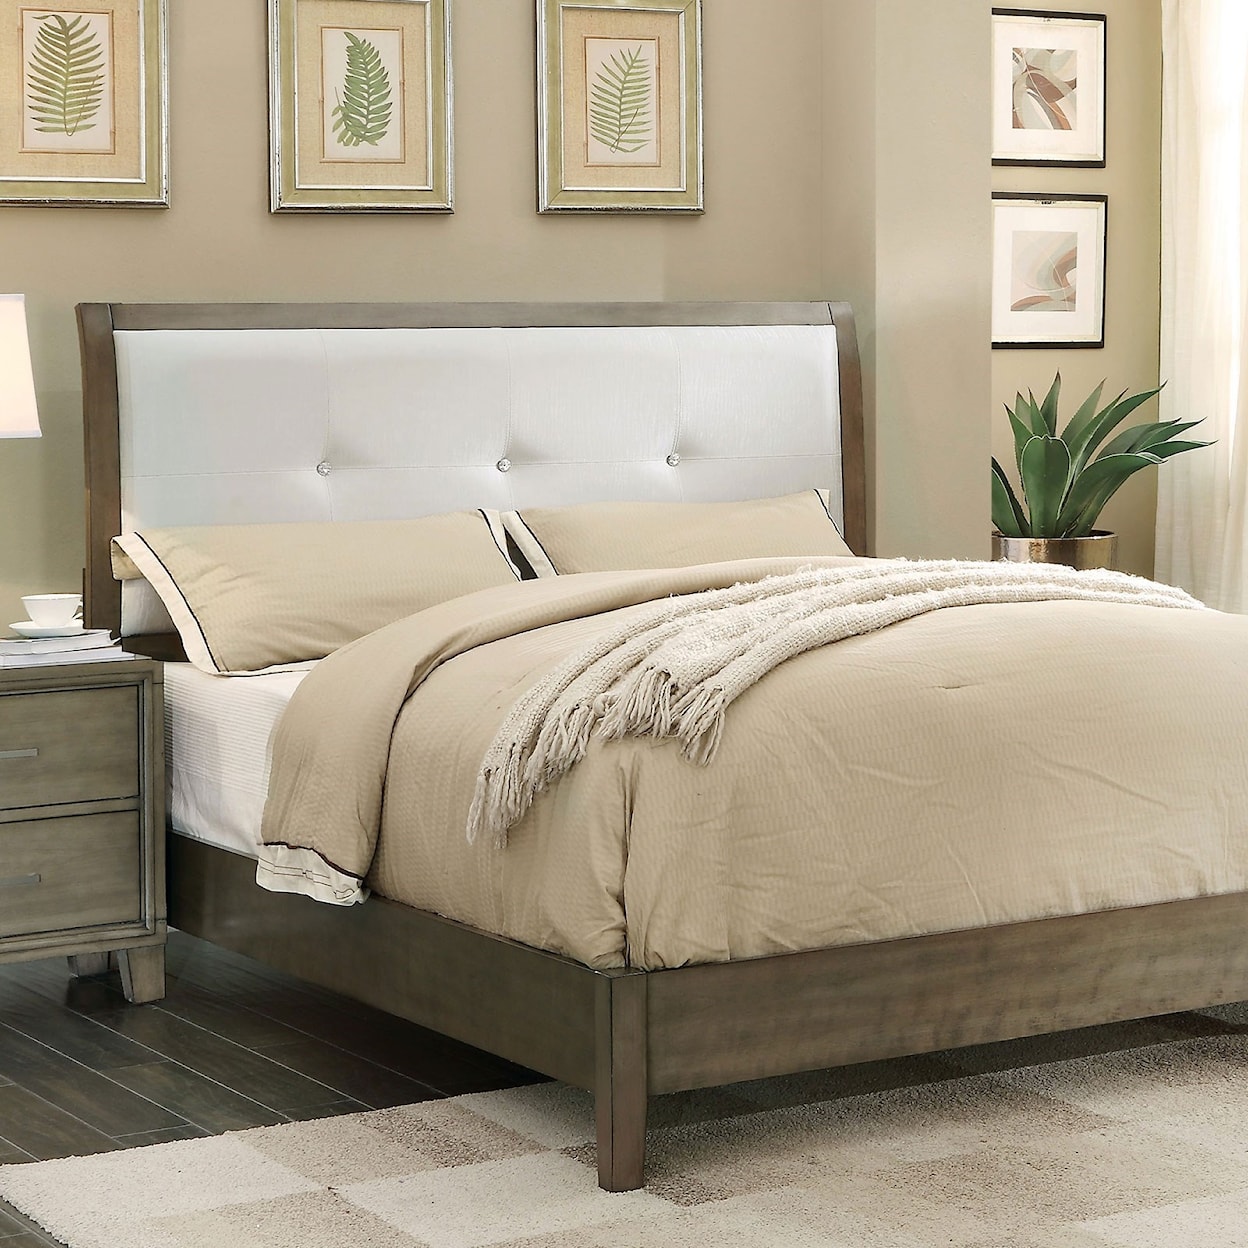 Furniture of America Enrico Queen Upholstered Bed